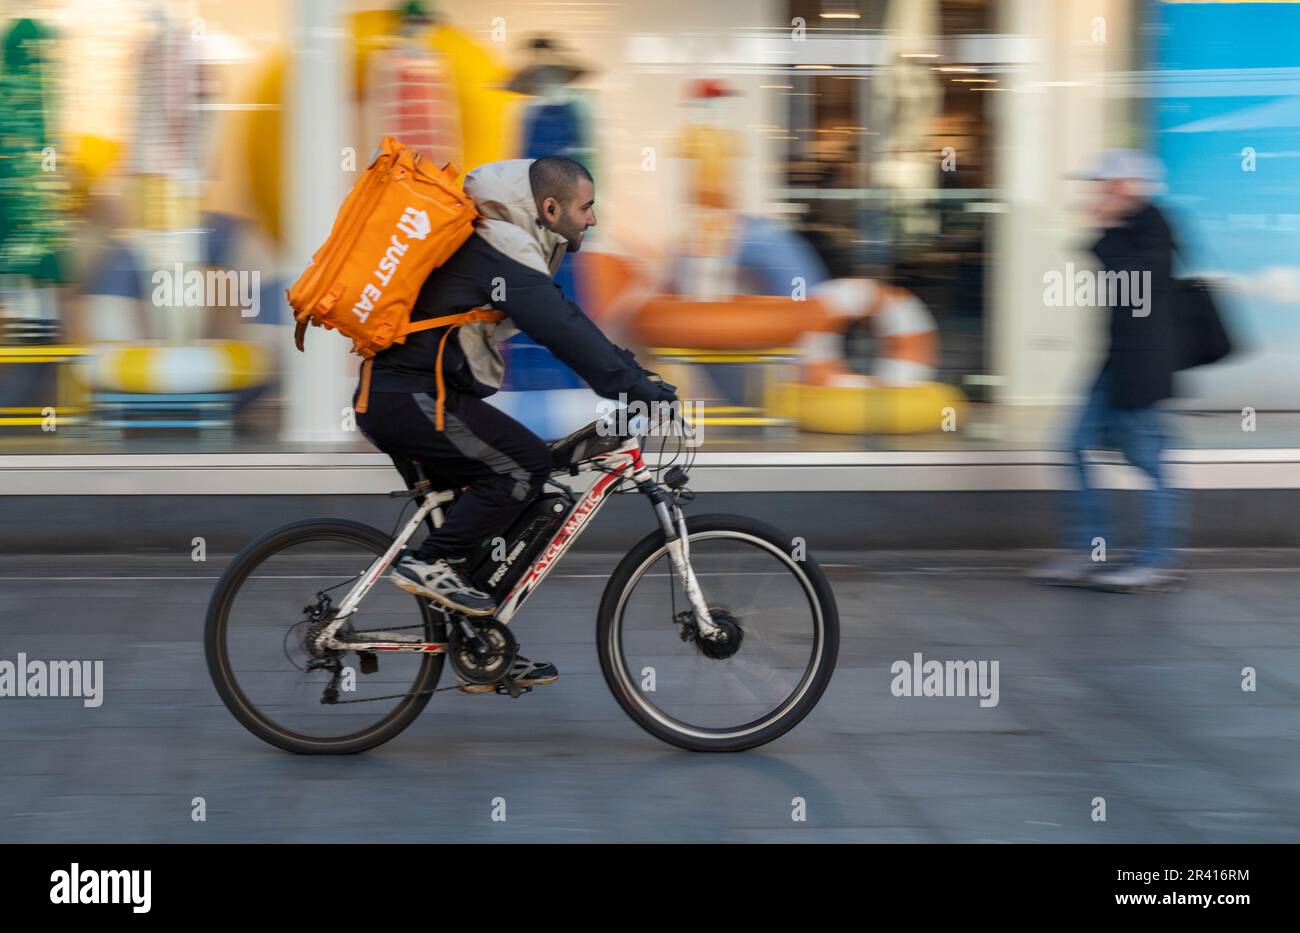 Just Eat bike delivery man in Liverpool Stock Photo